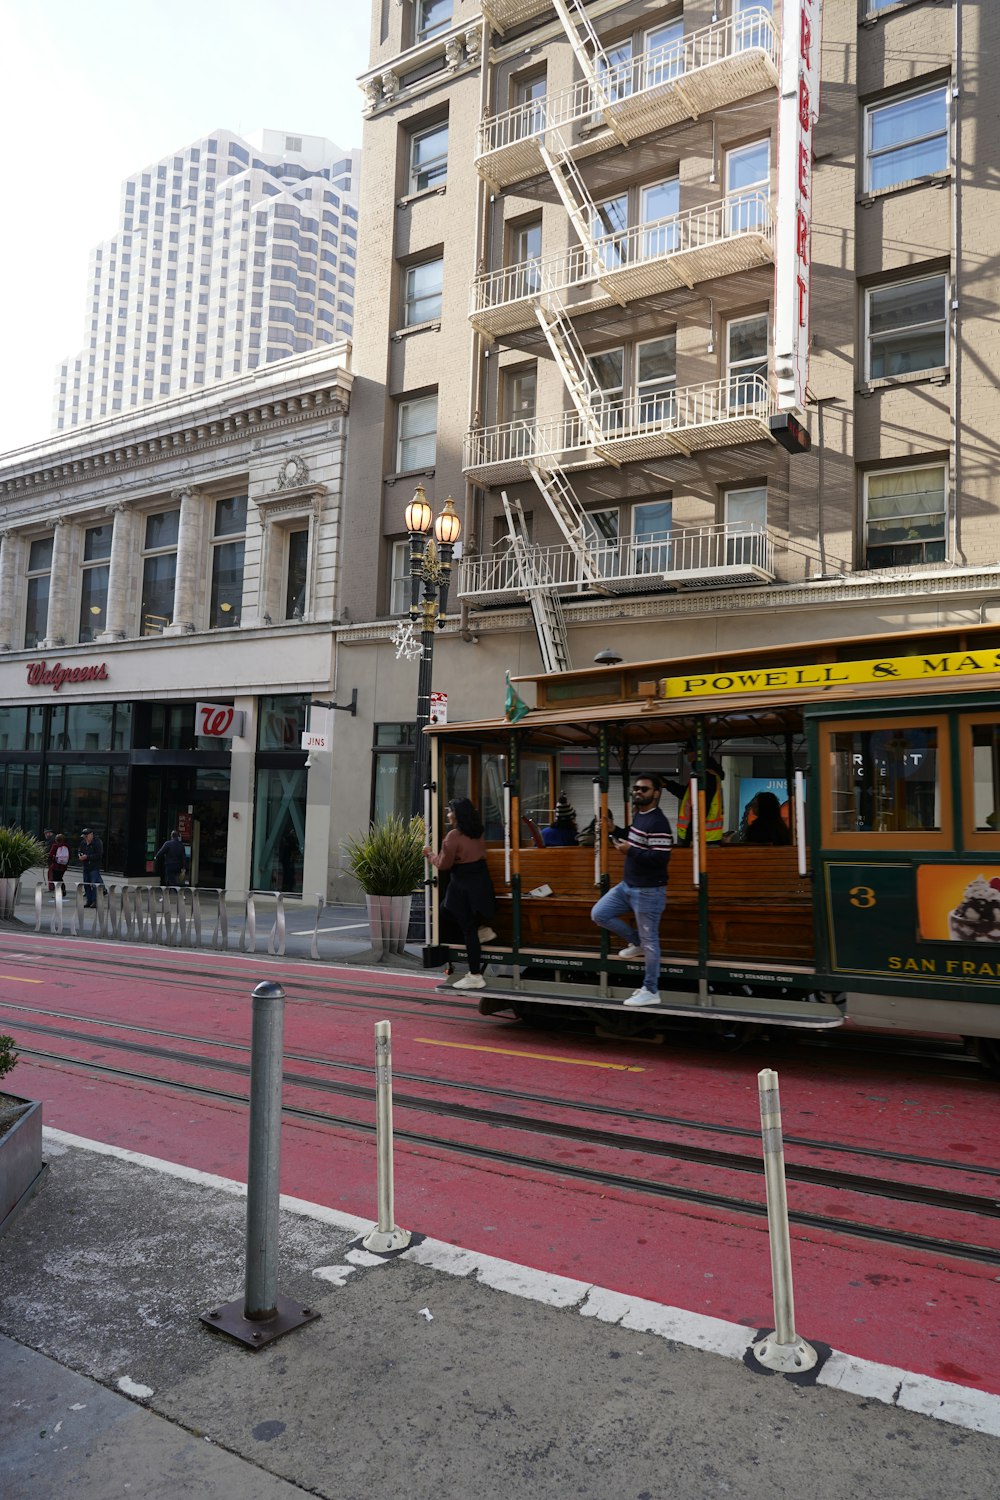 a trolley car on a city street with a building in the background